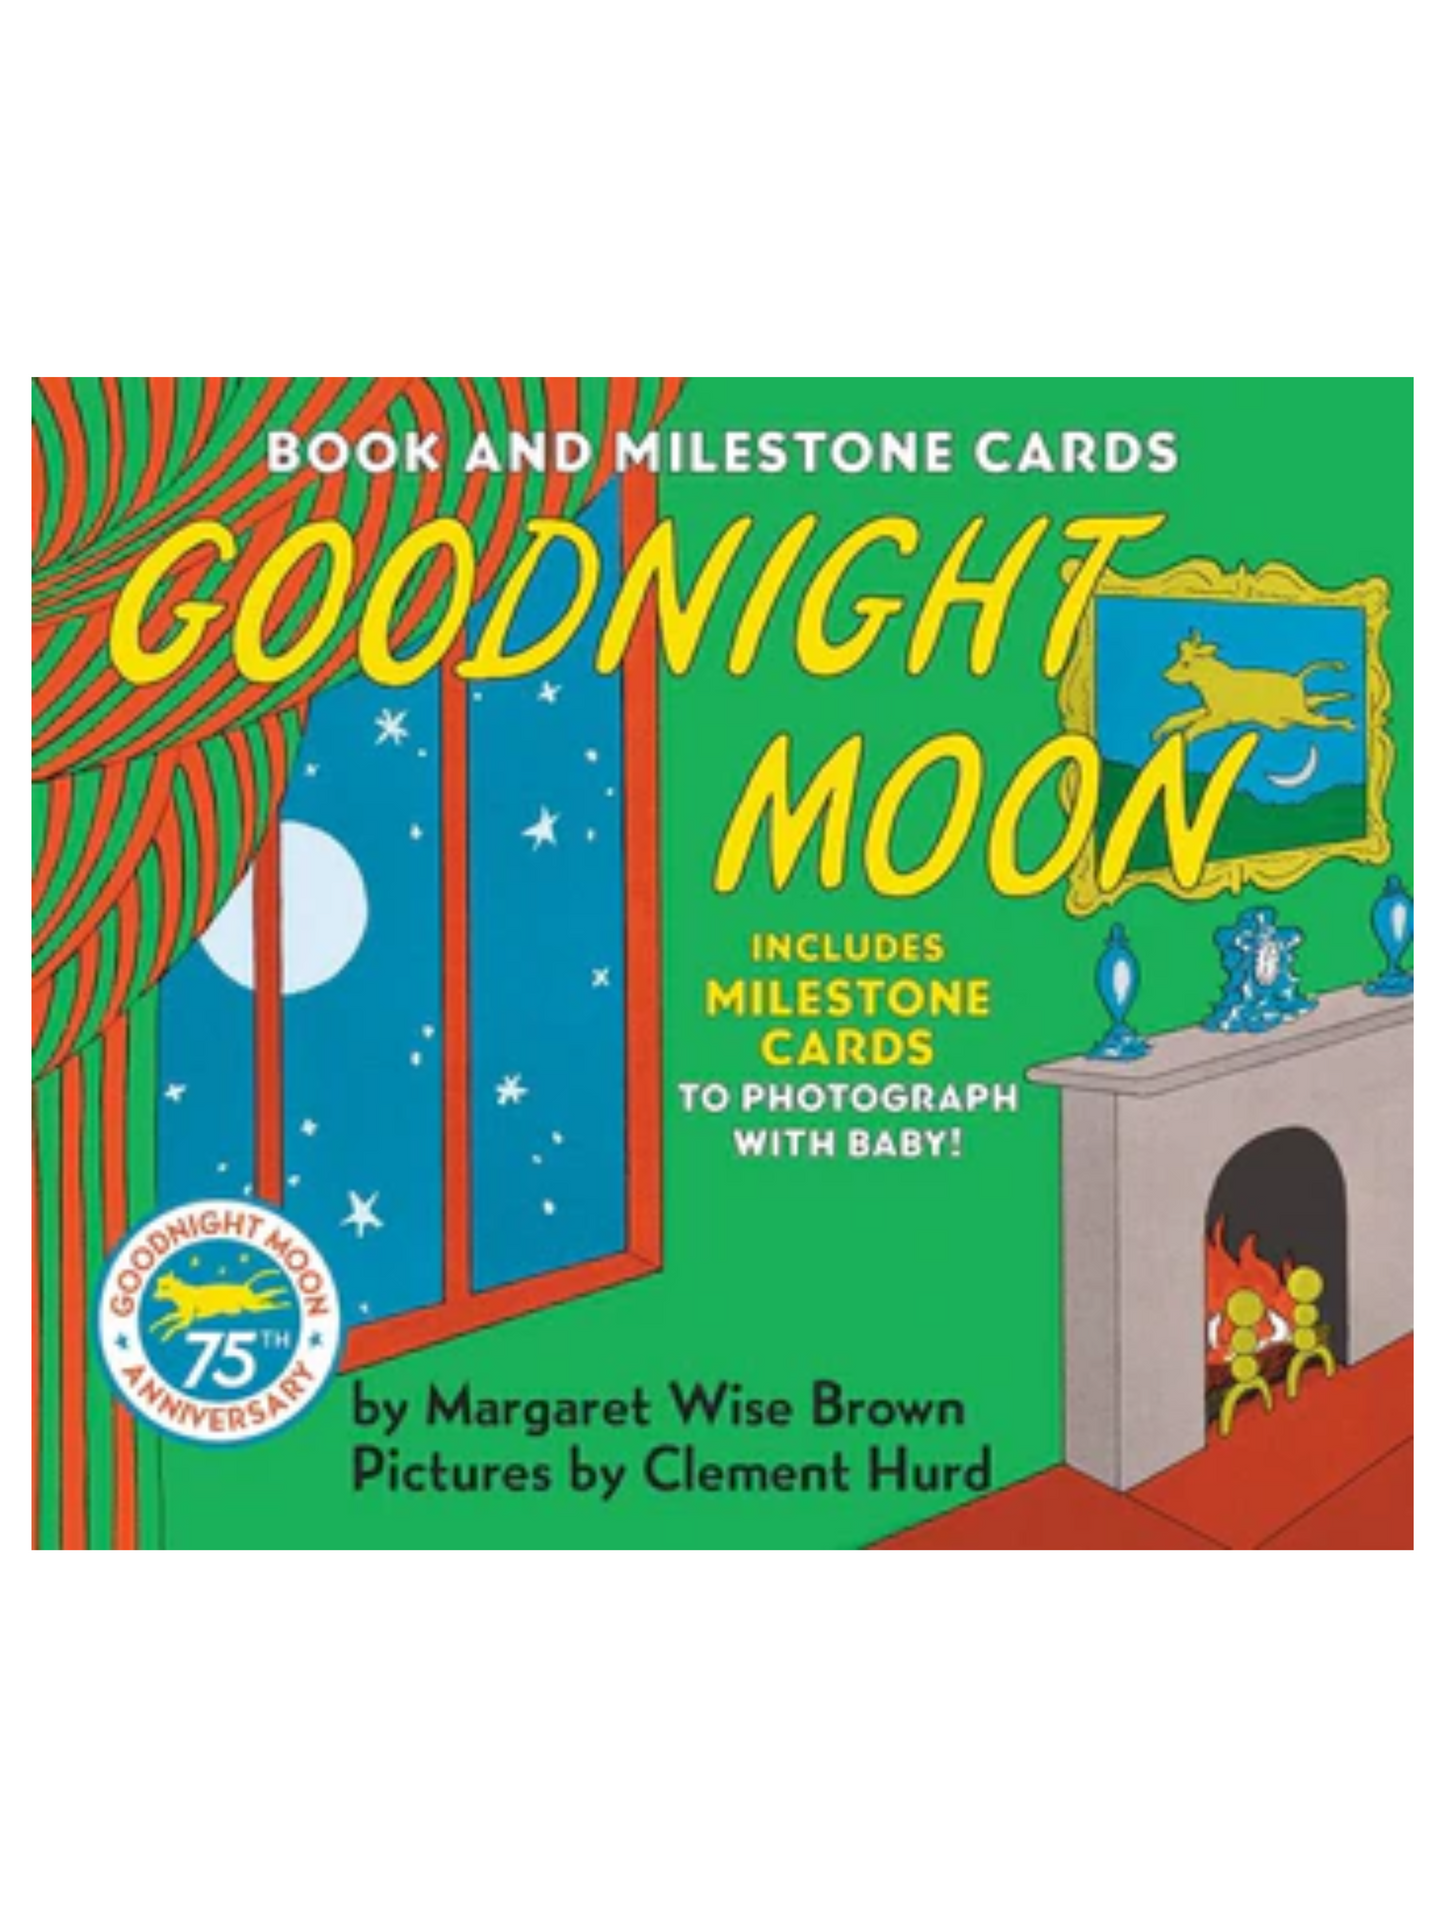 GOODNIGHT MOON BOOK AND BABY MILESTONE CARDS - THE LITTLE EAGLE 